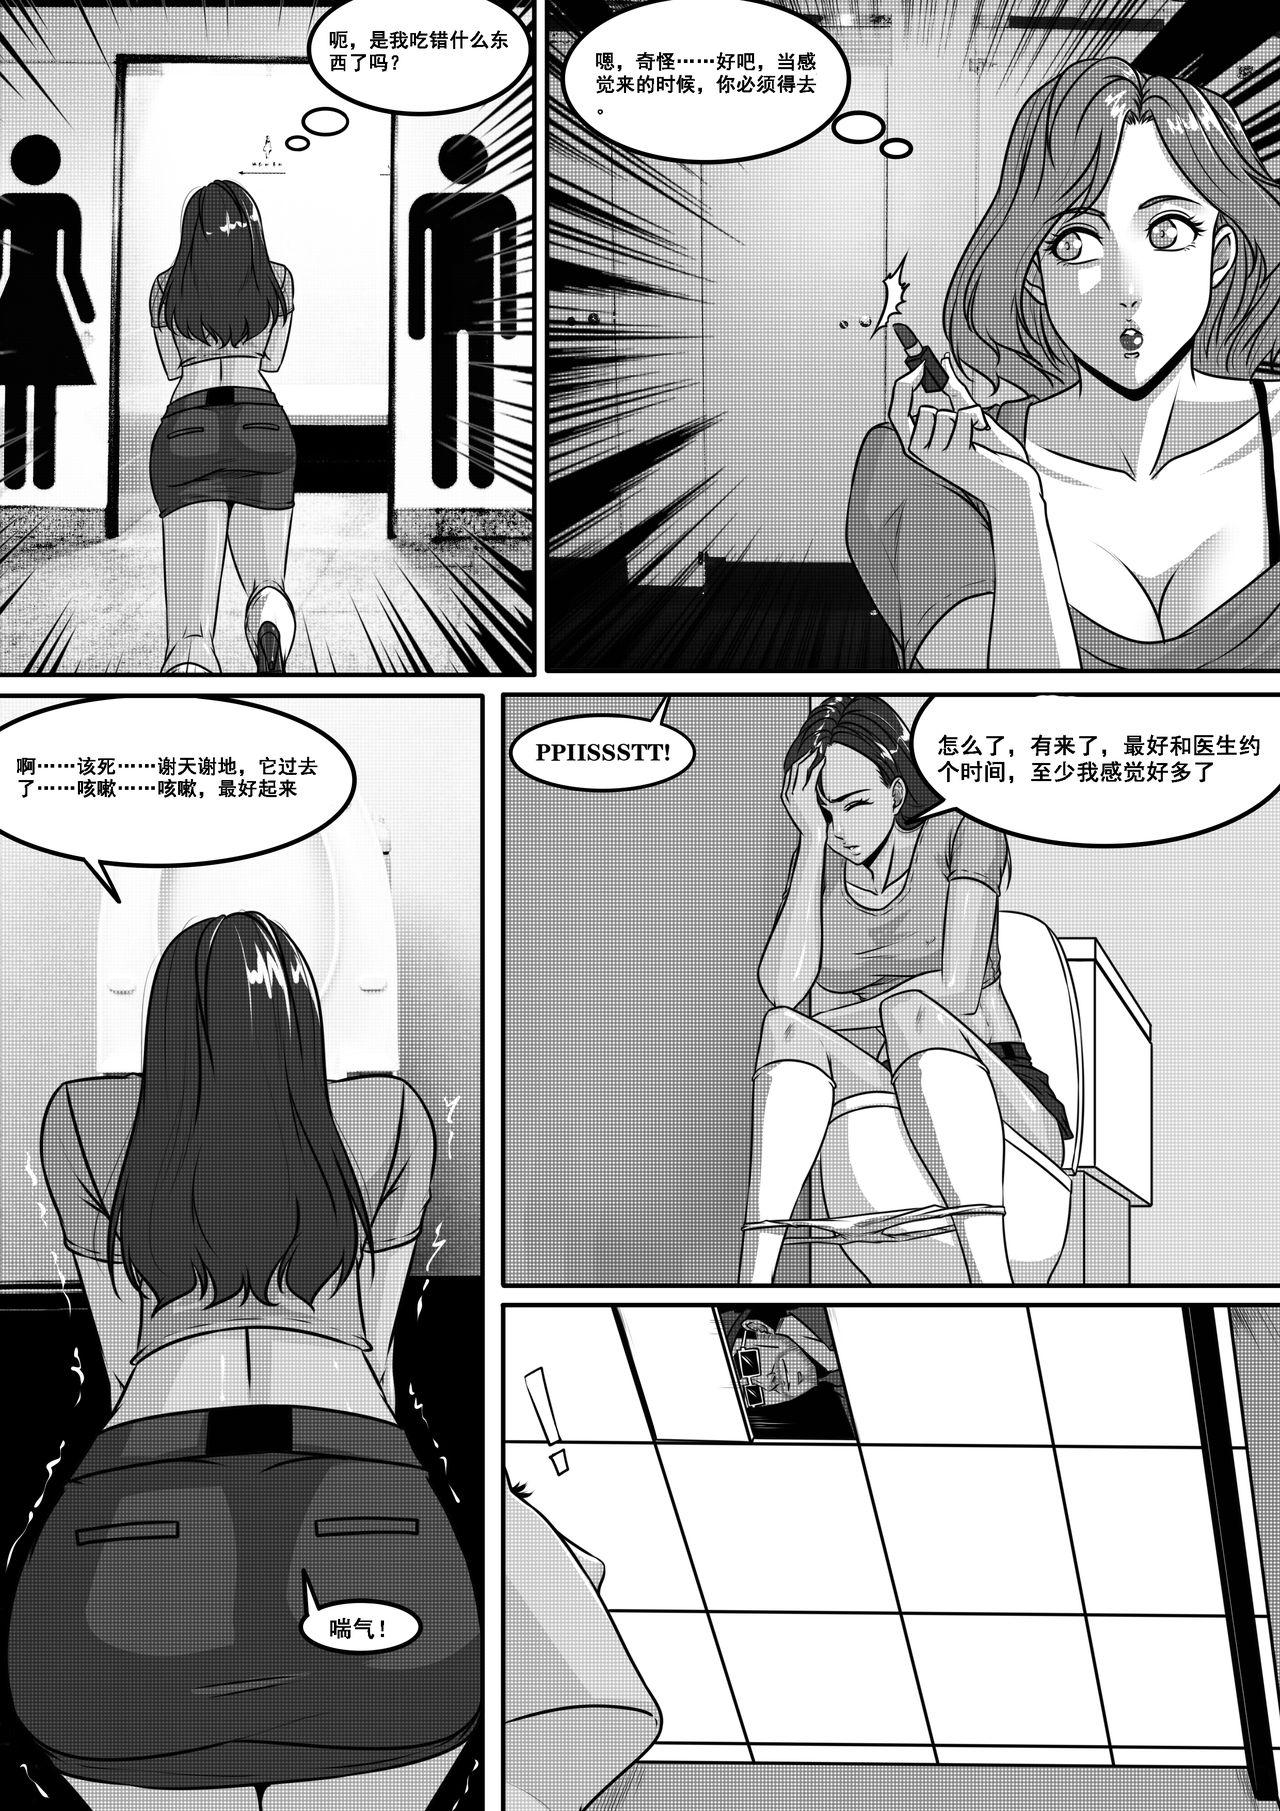 Taiwan Voyages of the Trader 1 Pervert - Page 5